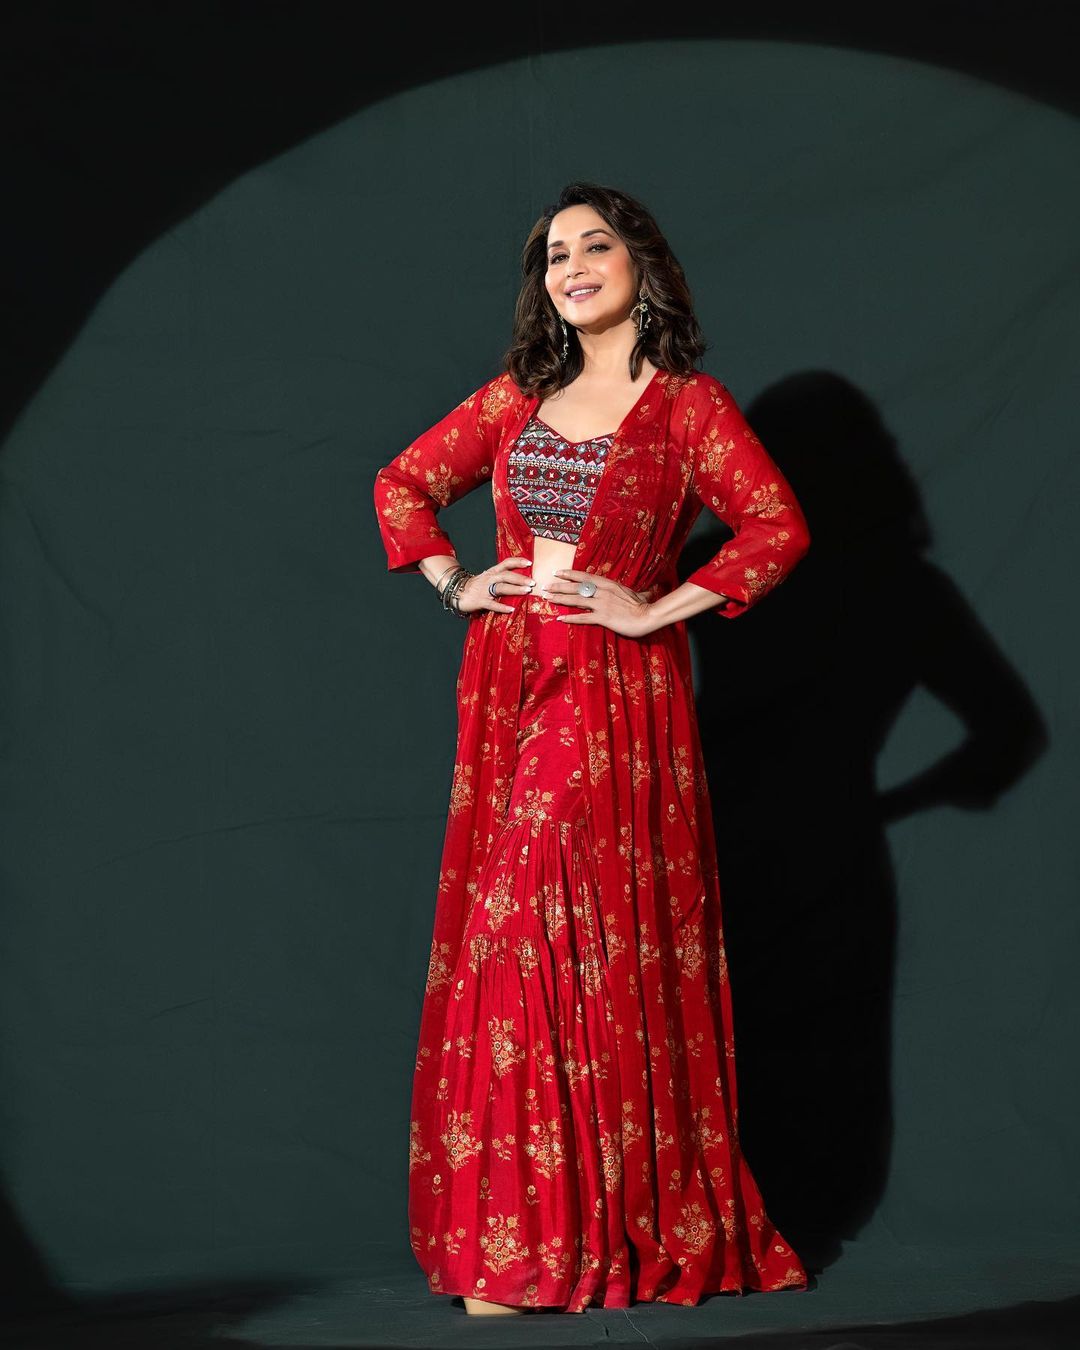 Madhuri Dixit Nene looks graceful in the red floral ethnic dress